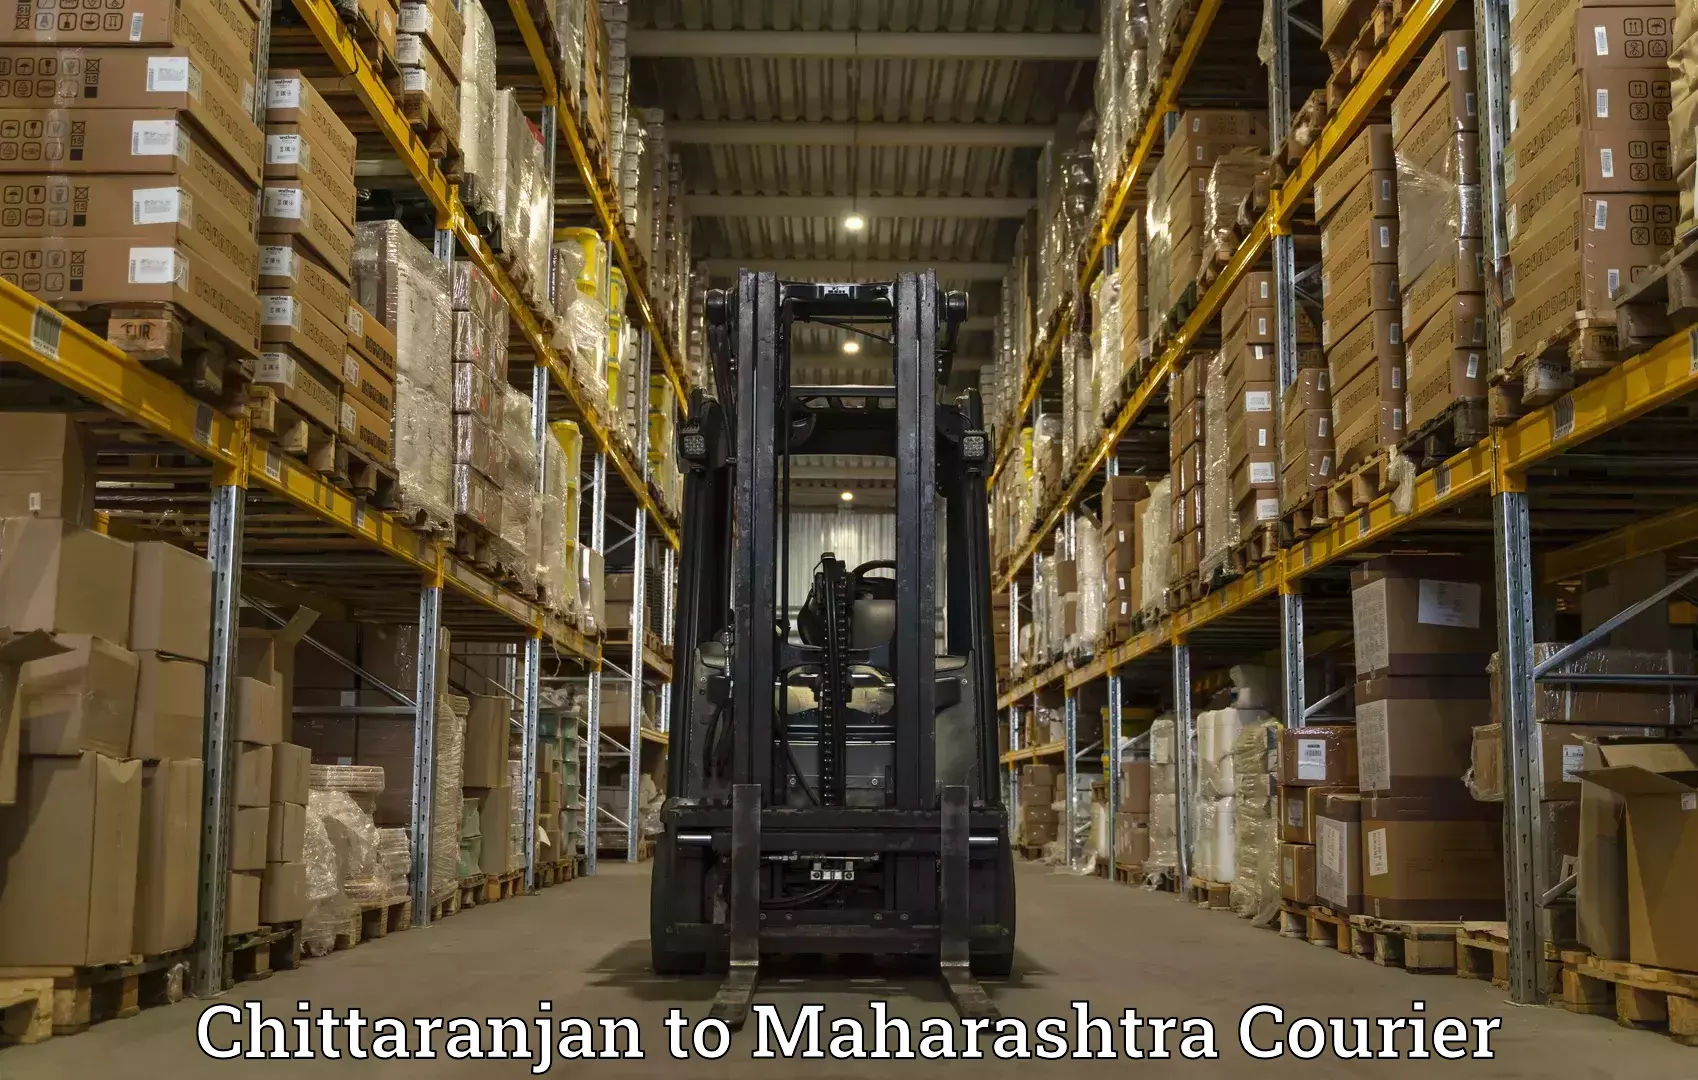 State-of-the-art courier technology Chittaranjan to Digras